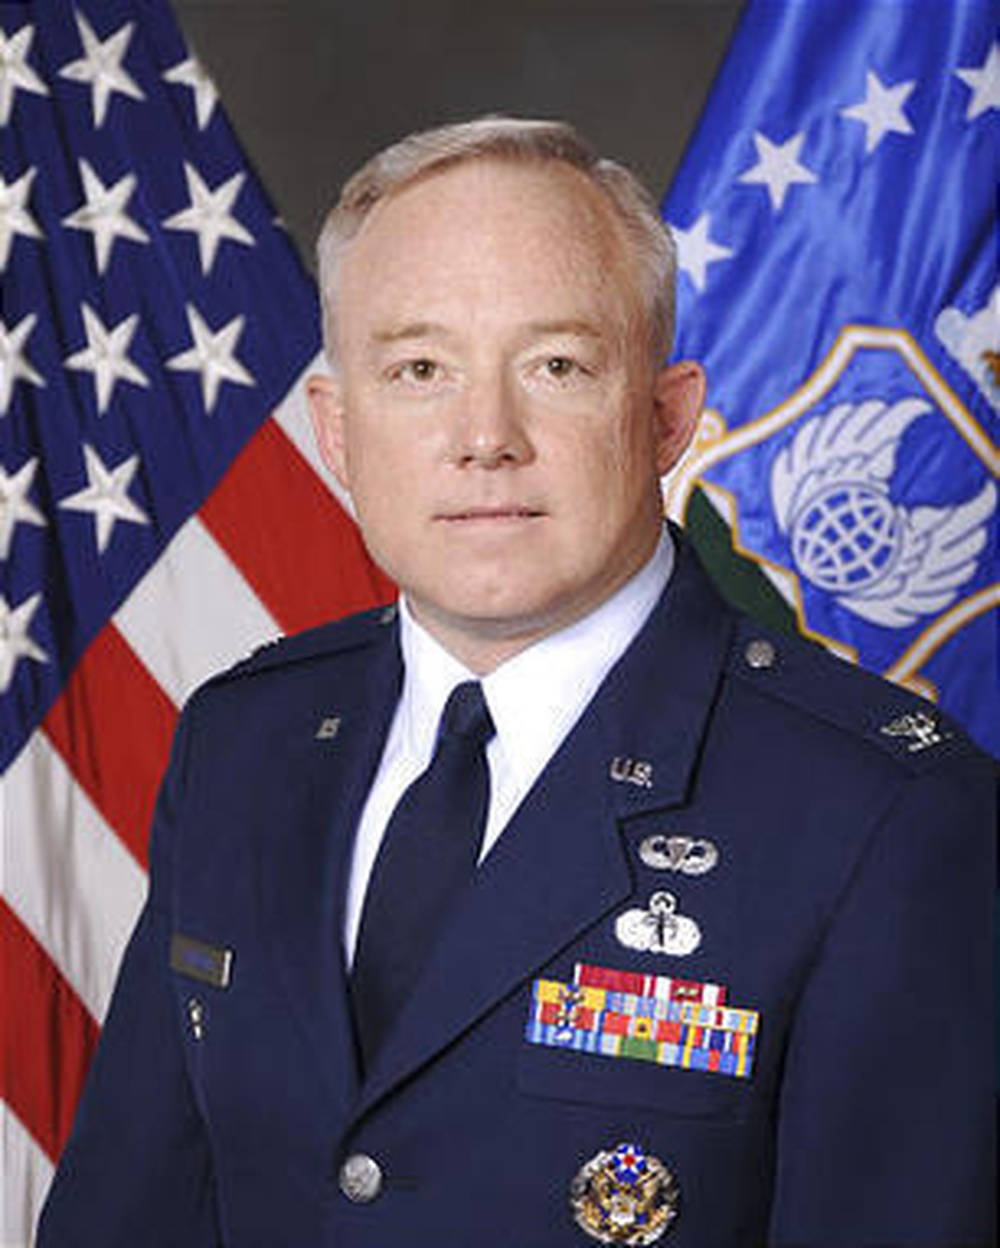 DVIDS News Air Force brigadier general selected as next DLA